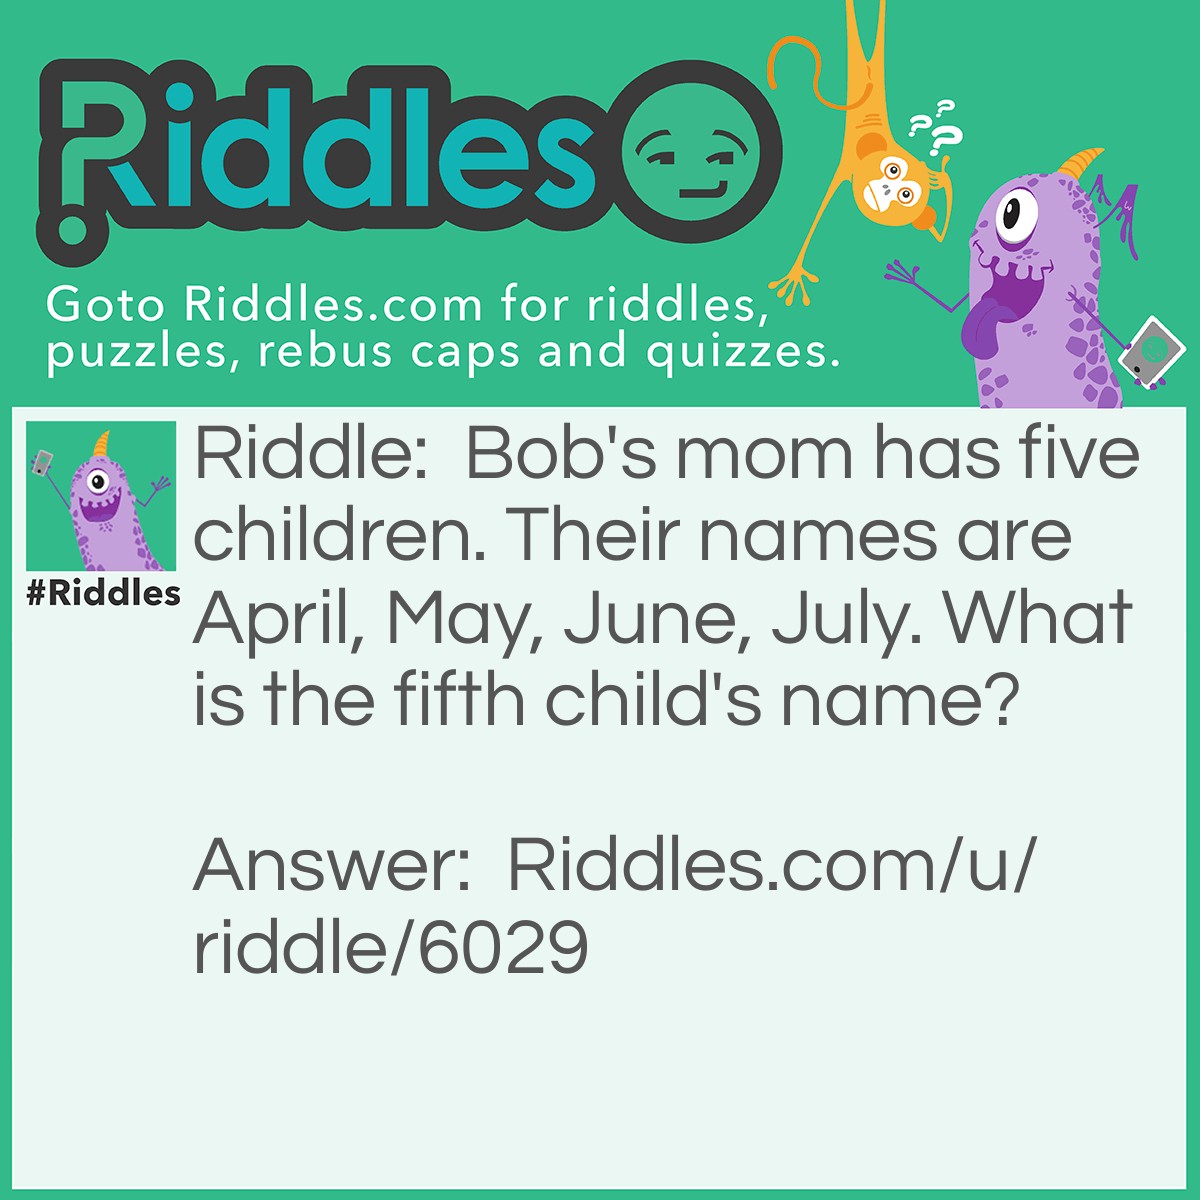 Riddle: Bob's mom has five children. Their names are April, May, June, July. What is the fifth child's name? Answer: The fifth child is Bob.